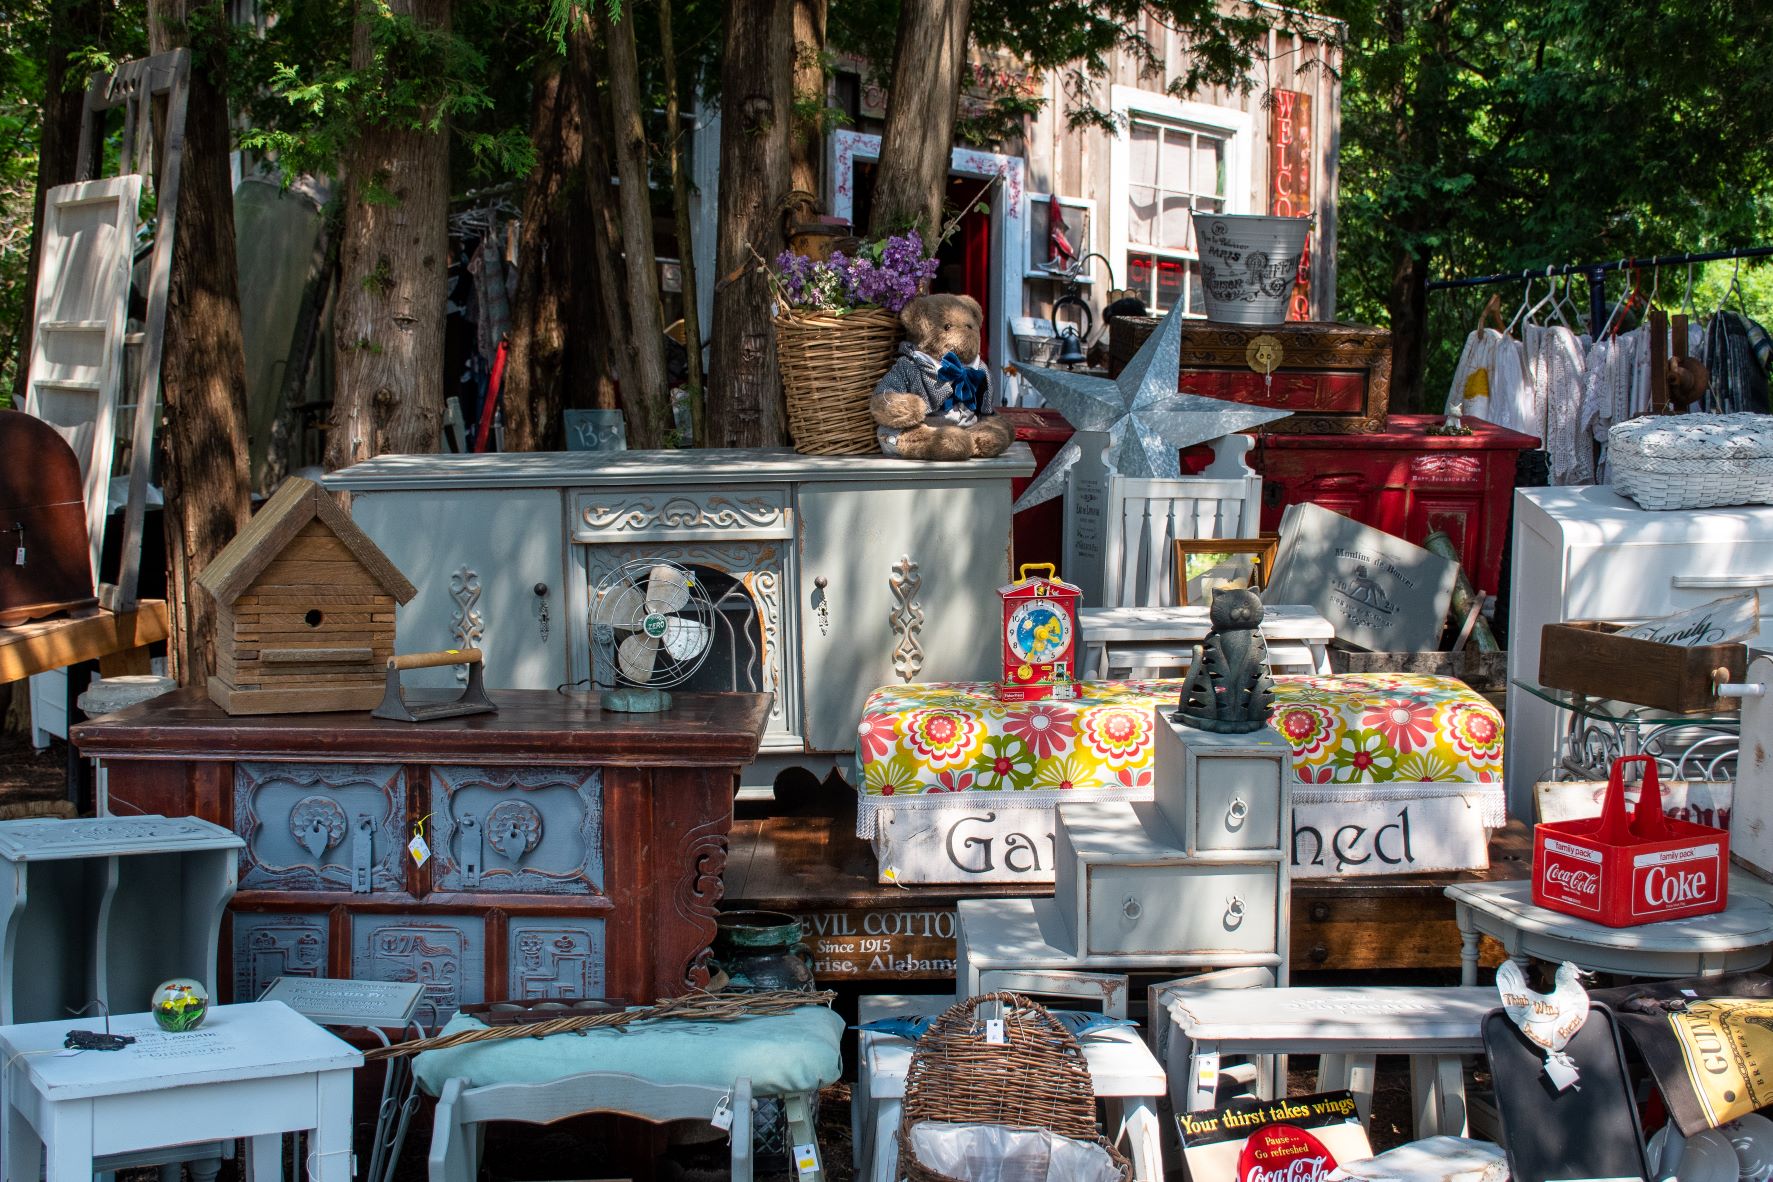 Canada's largest outdoor antique market is the Aberfoyle Antique Market. Located in Aberfoyle Ontario, about 40 minutes west of Toronto, is open spring until fall. It features a Sunday exclusive market with over 100 of the best antique dealers in Ontario.